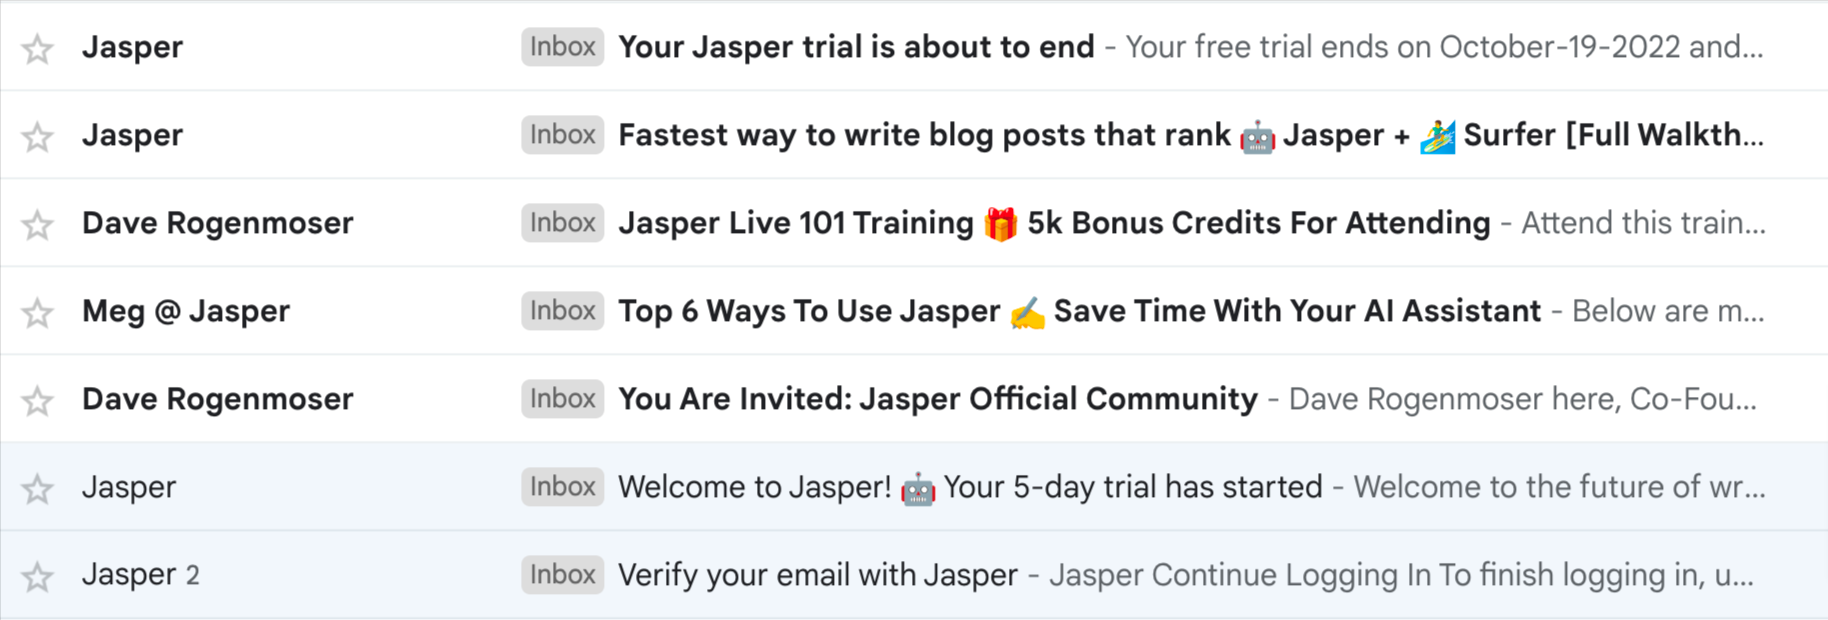 Example of email series for a free trial sign-up just like Jasper AI writing tool.